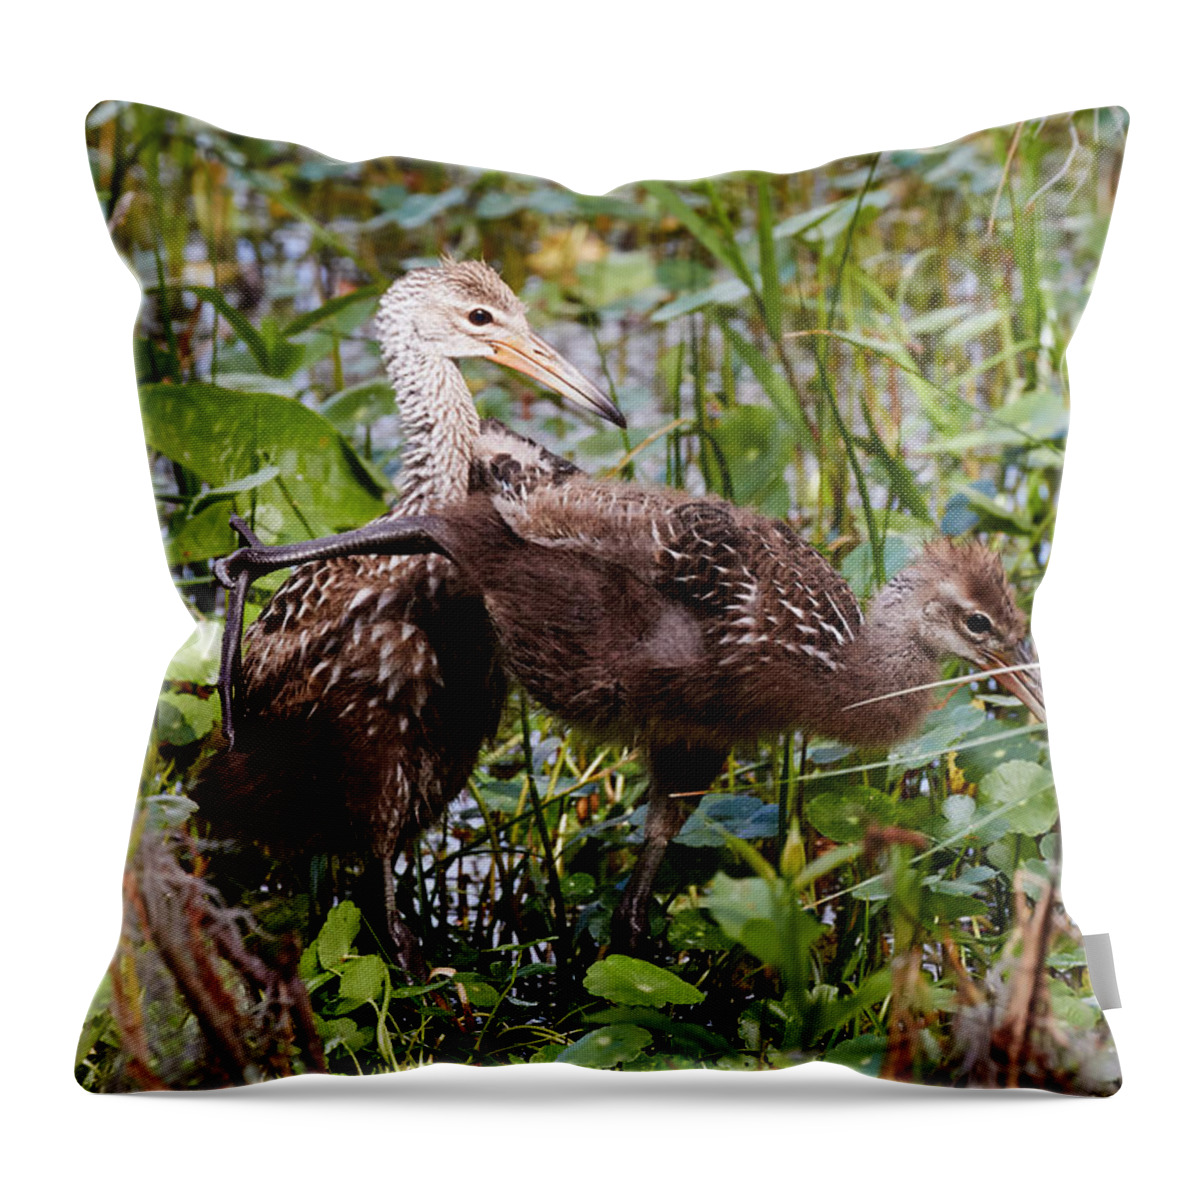 Limpkin Throw Pillow featuring the photograph Kung-fu Limpkins by David Beebe